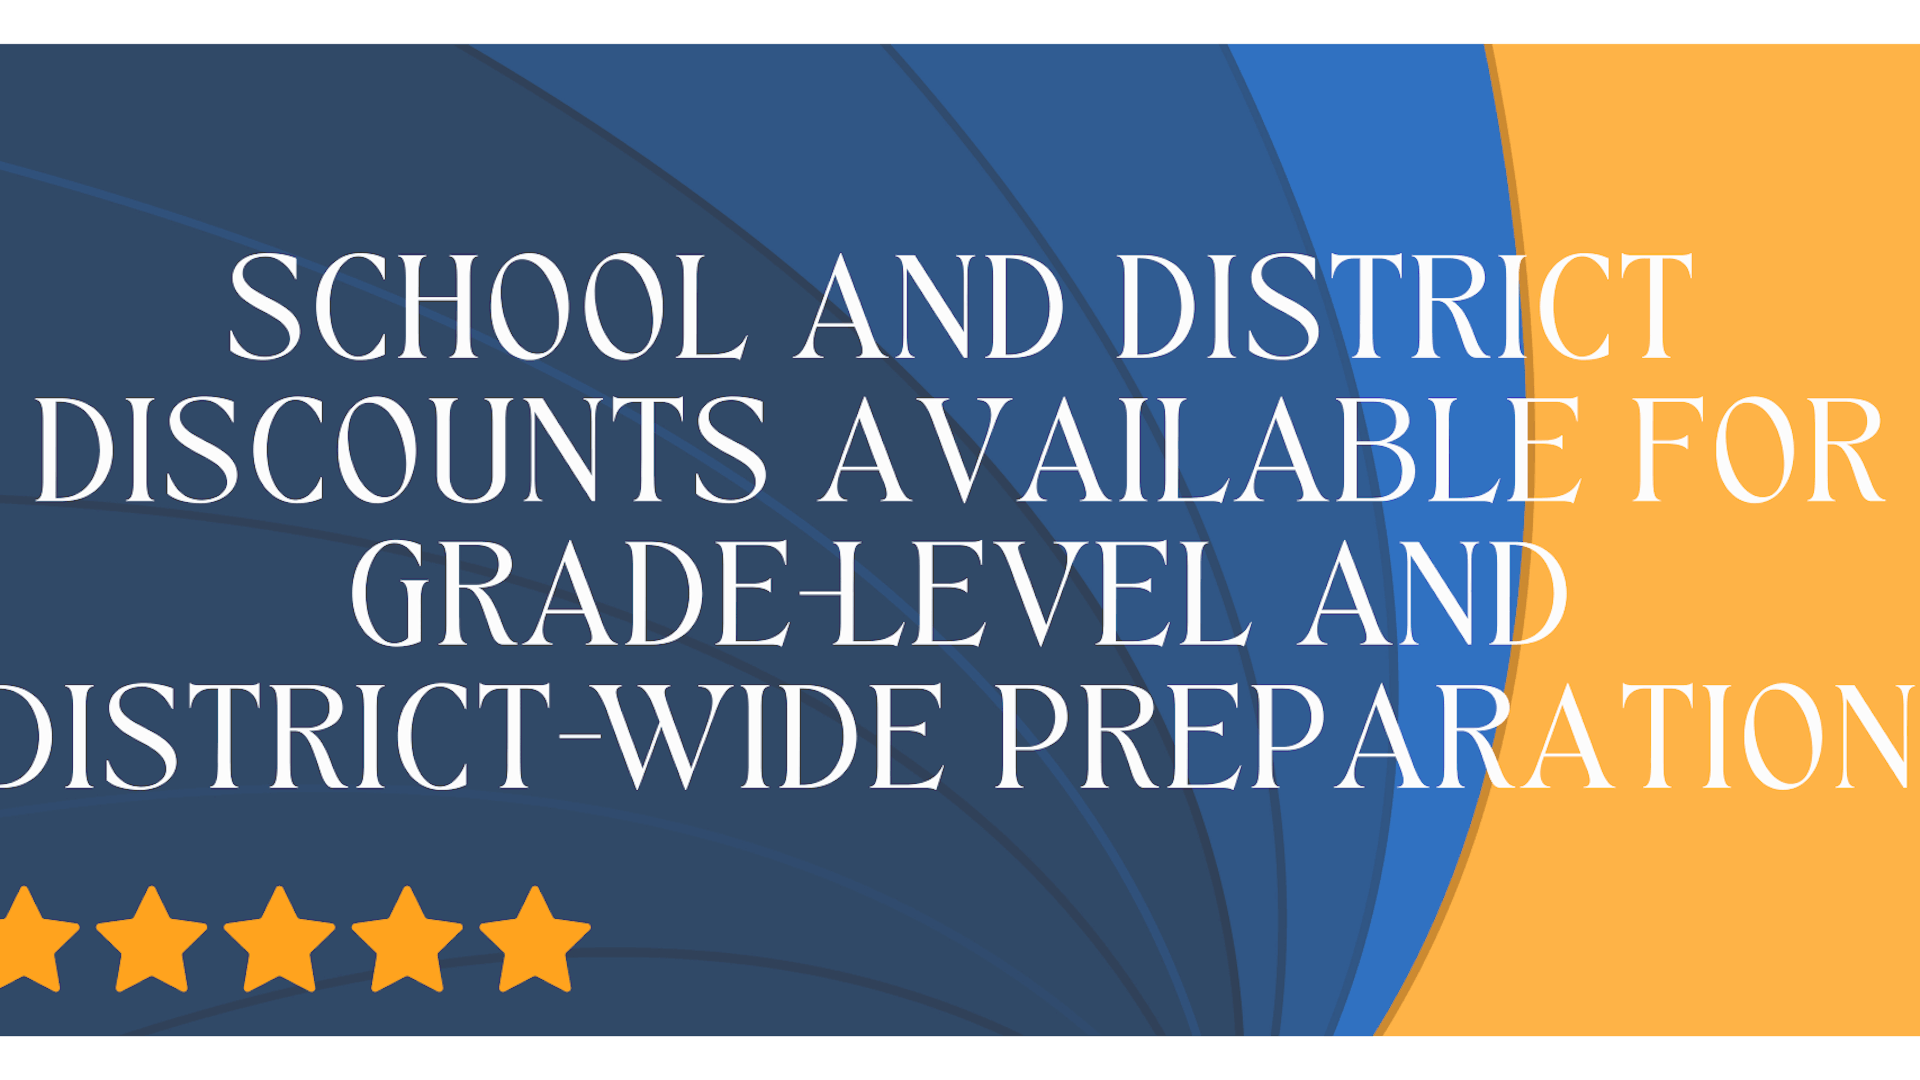 School and district discounts available for grade-level and district-wide preparation